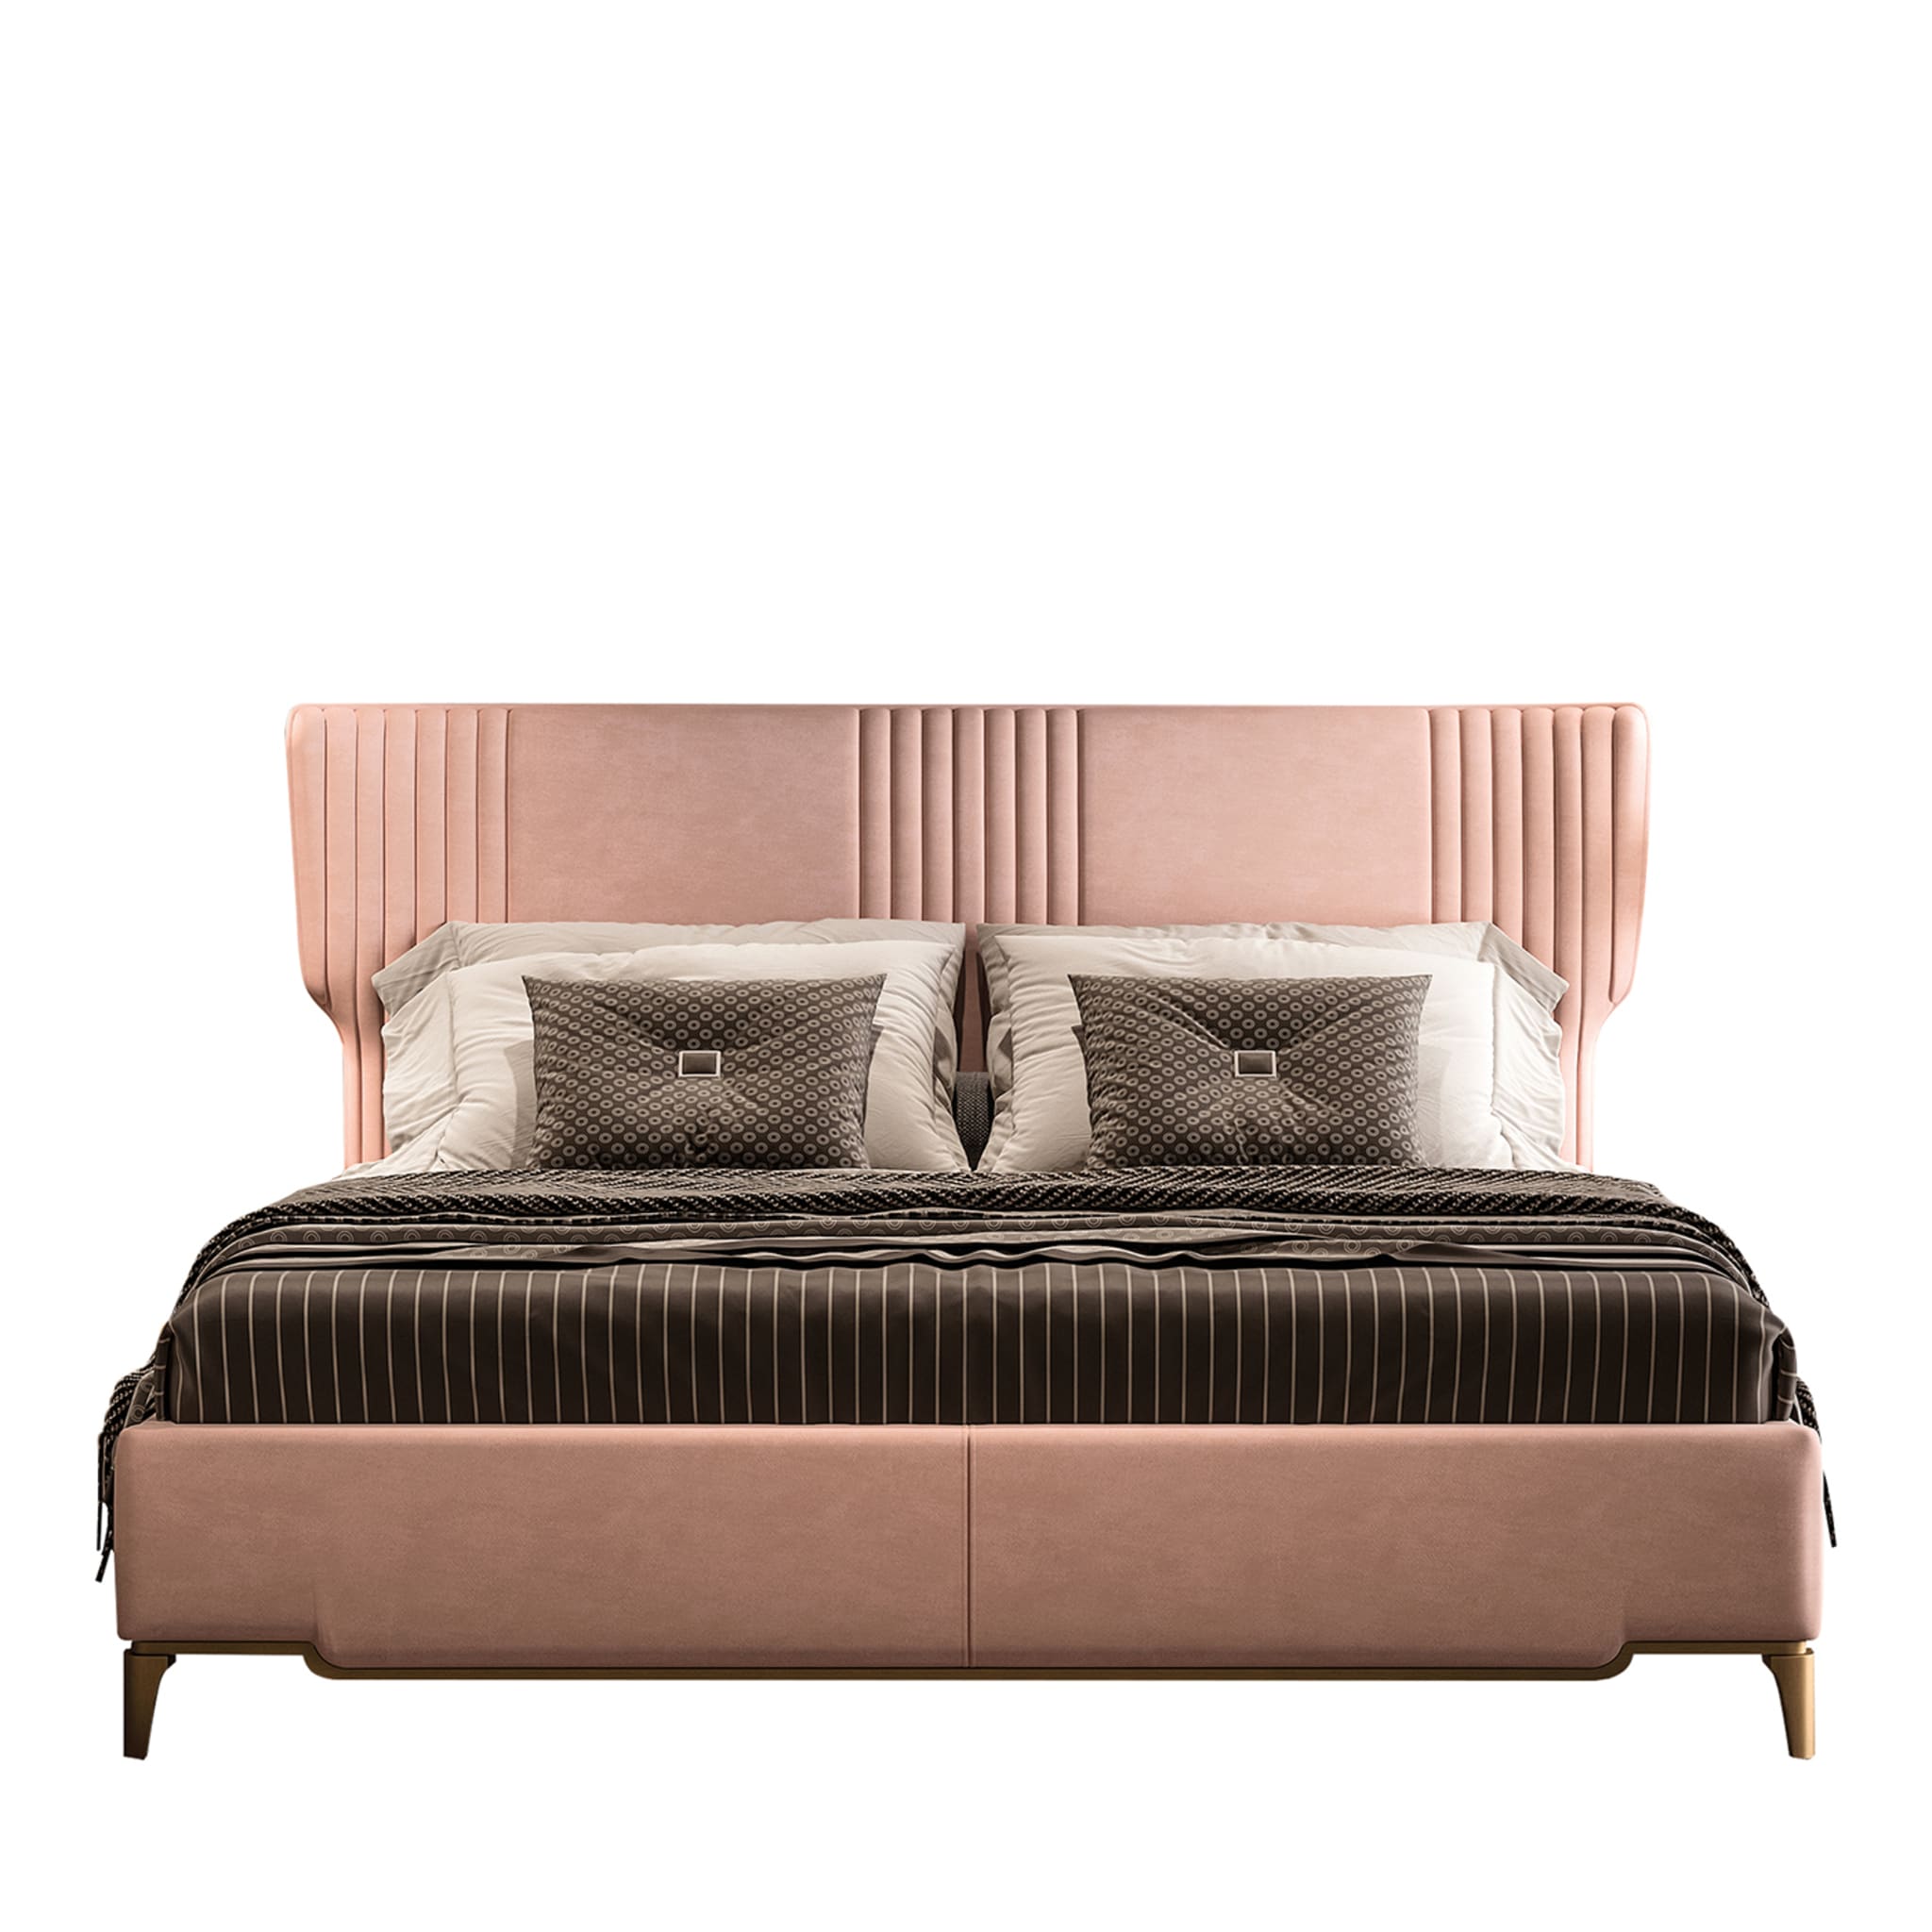 Gattopardo Pink Double Bed - Main view